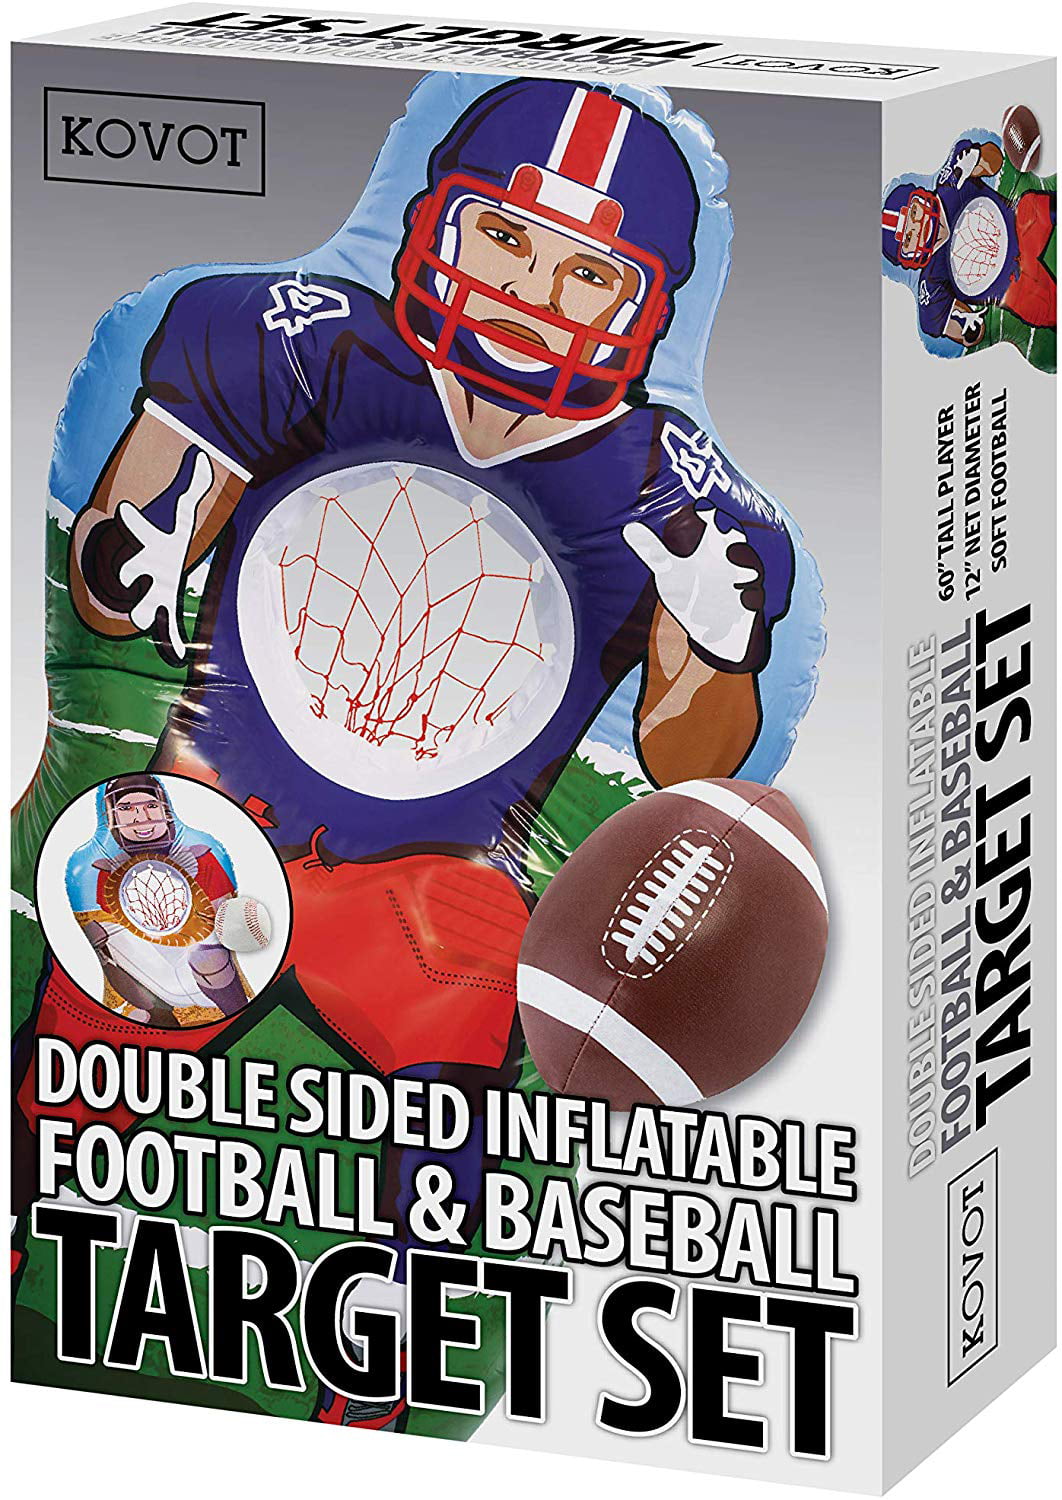 Kovot Inflatable Sports Double Sided Target Set - Inflates to 5 Feet Tall!  - Soft Mini Toss Balls Included (Football/Baseball)